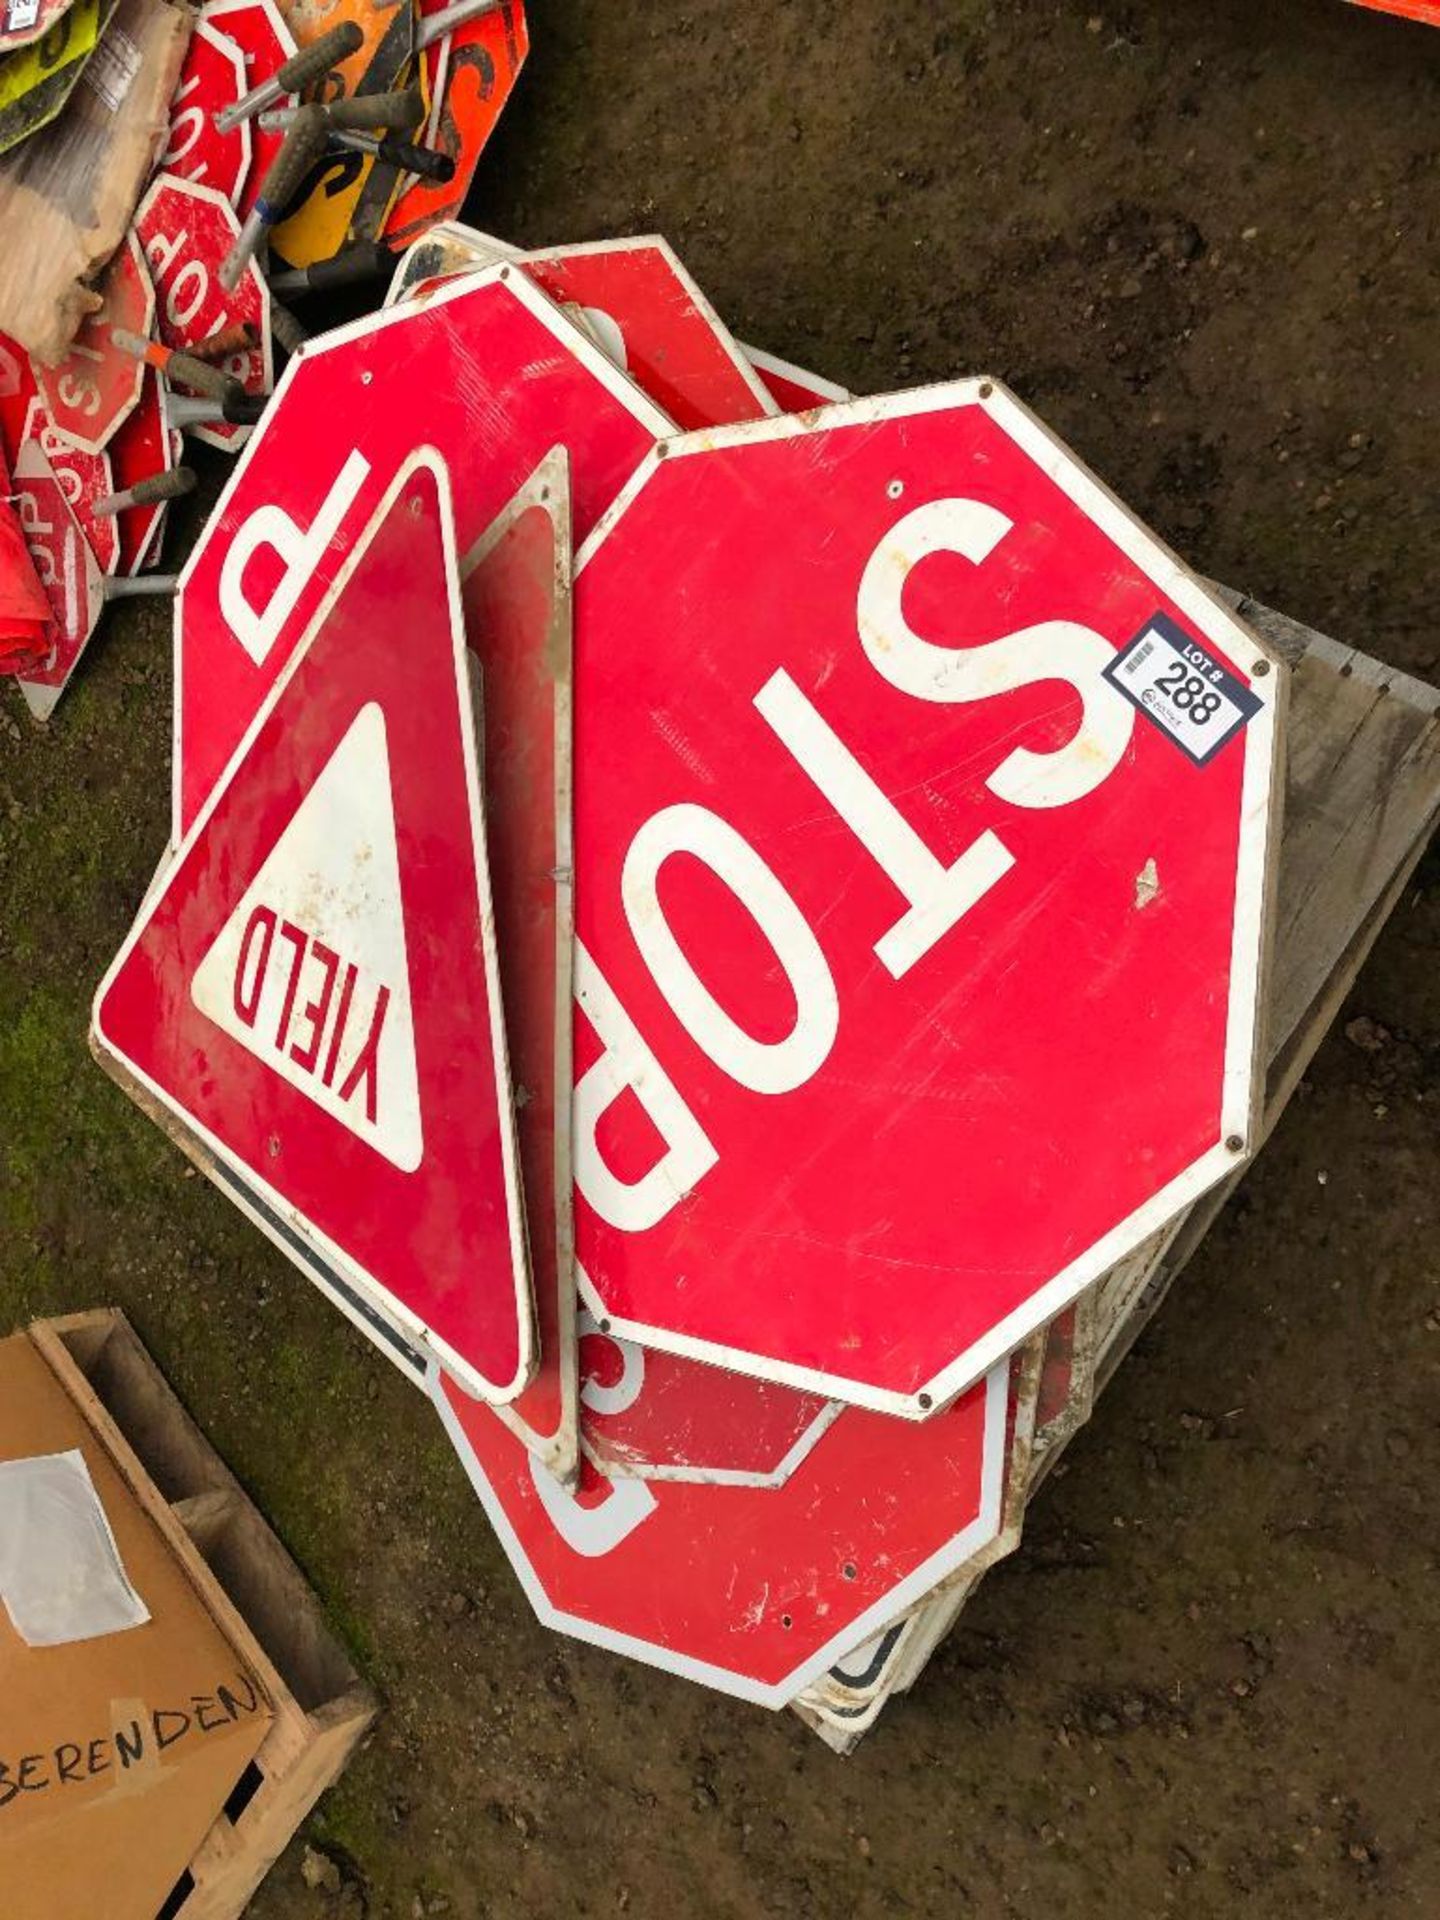 Pallet of Asst. Size Stop Signs and Yield Signs, No Passing Signs, etc.